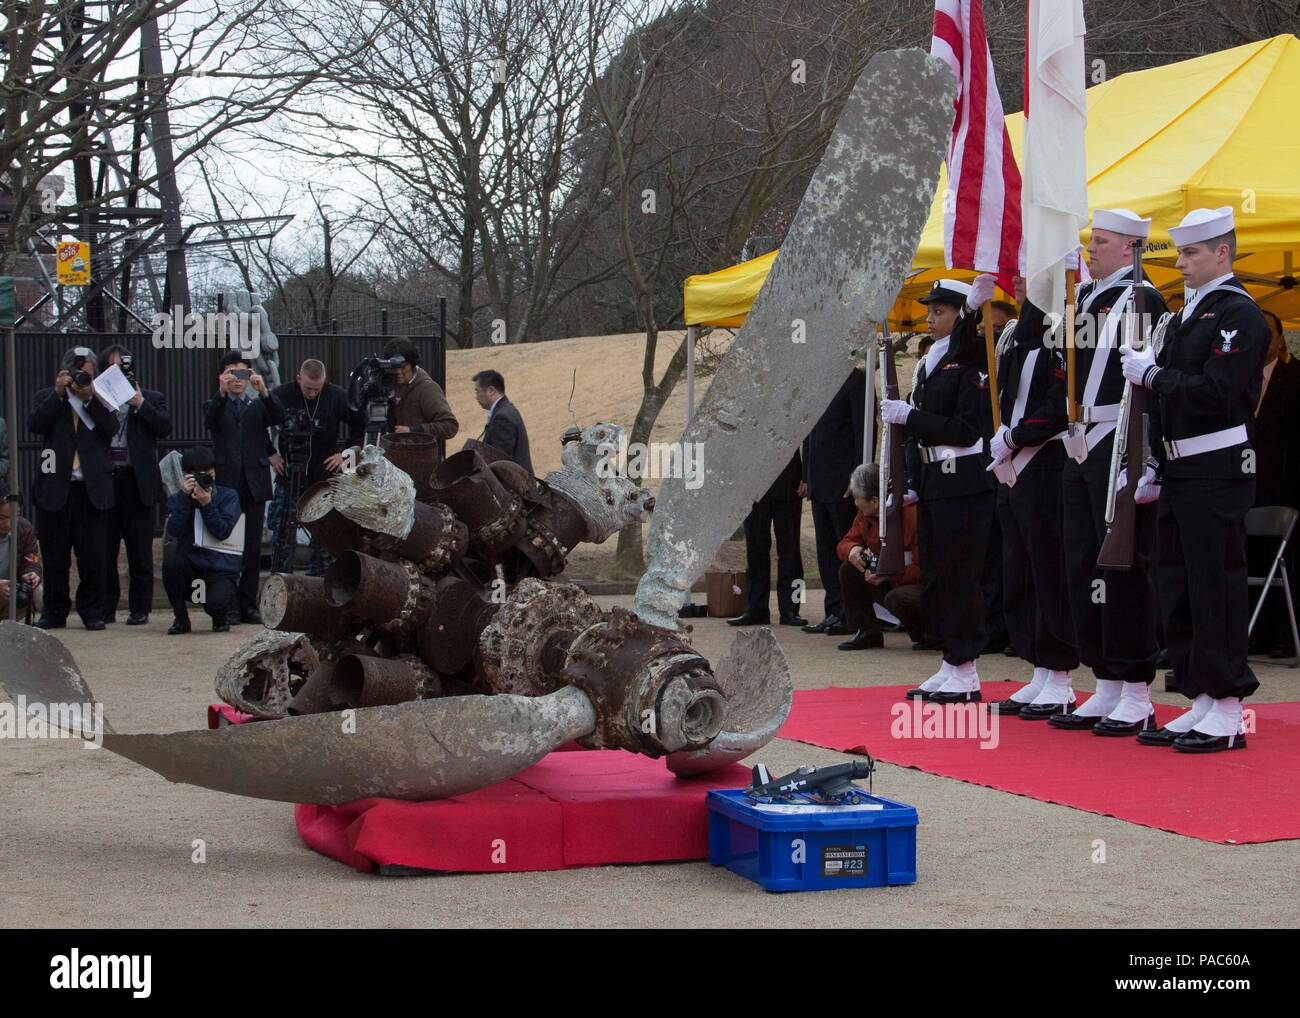 160306-N-QY759-052 SAIKI CITY, Japan (March 6, 2016) The Commander U.S. Fleet Activities Sasebo Color Guard renders honors at the departure ceremony for parts of a World War II F4U-1D Corsair fighter-bomber held at Yawaragi Peace Memorial Hall in Saiki City, Japan. The parts are from a Fighter Squadron (VF) 10 Corsair that was ditched off Saiki on March 18, 1945 after attacking an Oita military airfield. They were salvaged from the water and displayed until the decision was made to return them to the U.S. Navy as a goodwill gesture marking seven decades since the end of World War II. (U.S. Nav Stock Photo